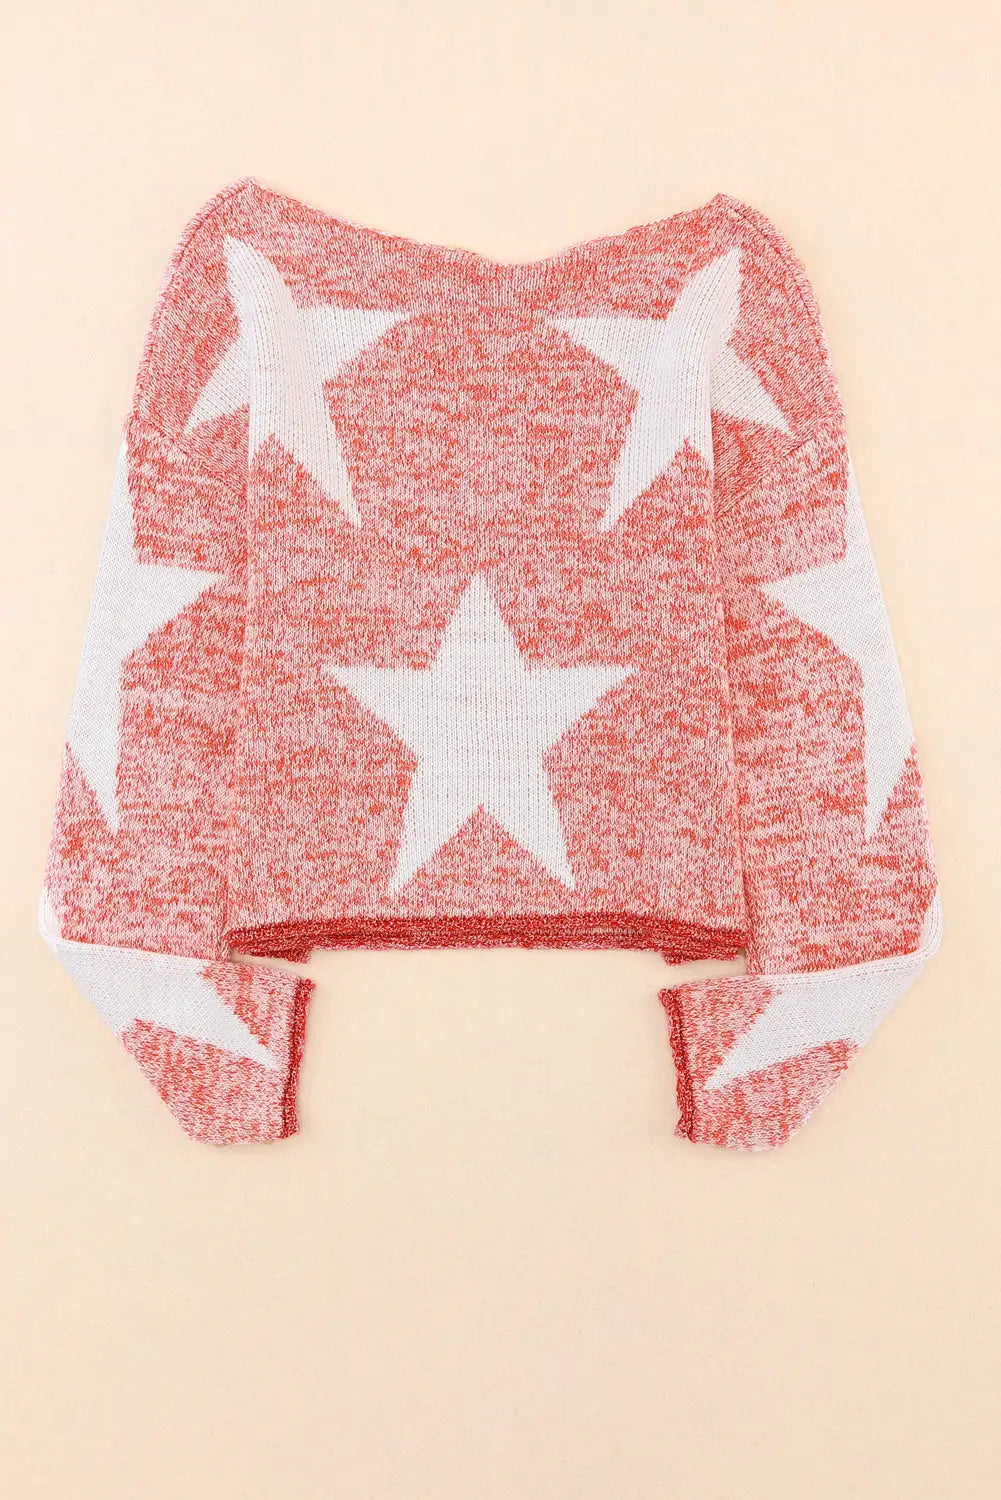 Big star spangled casual knit sweater - sweaters & cardigans